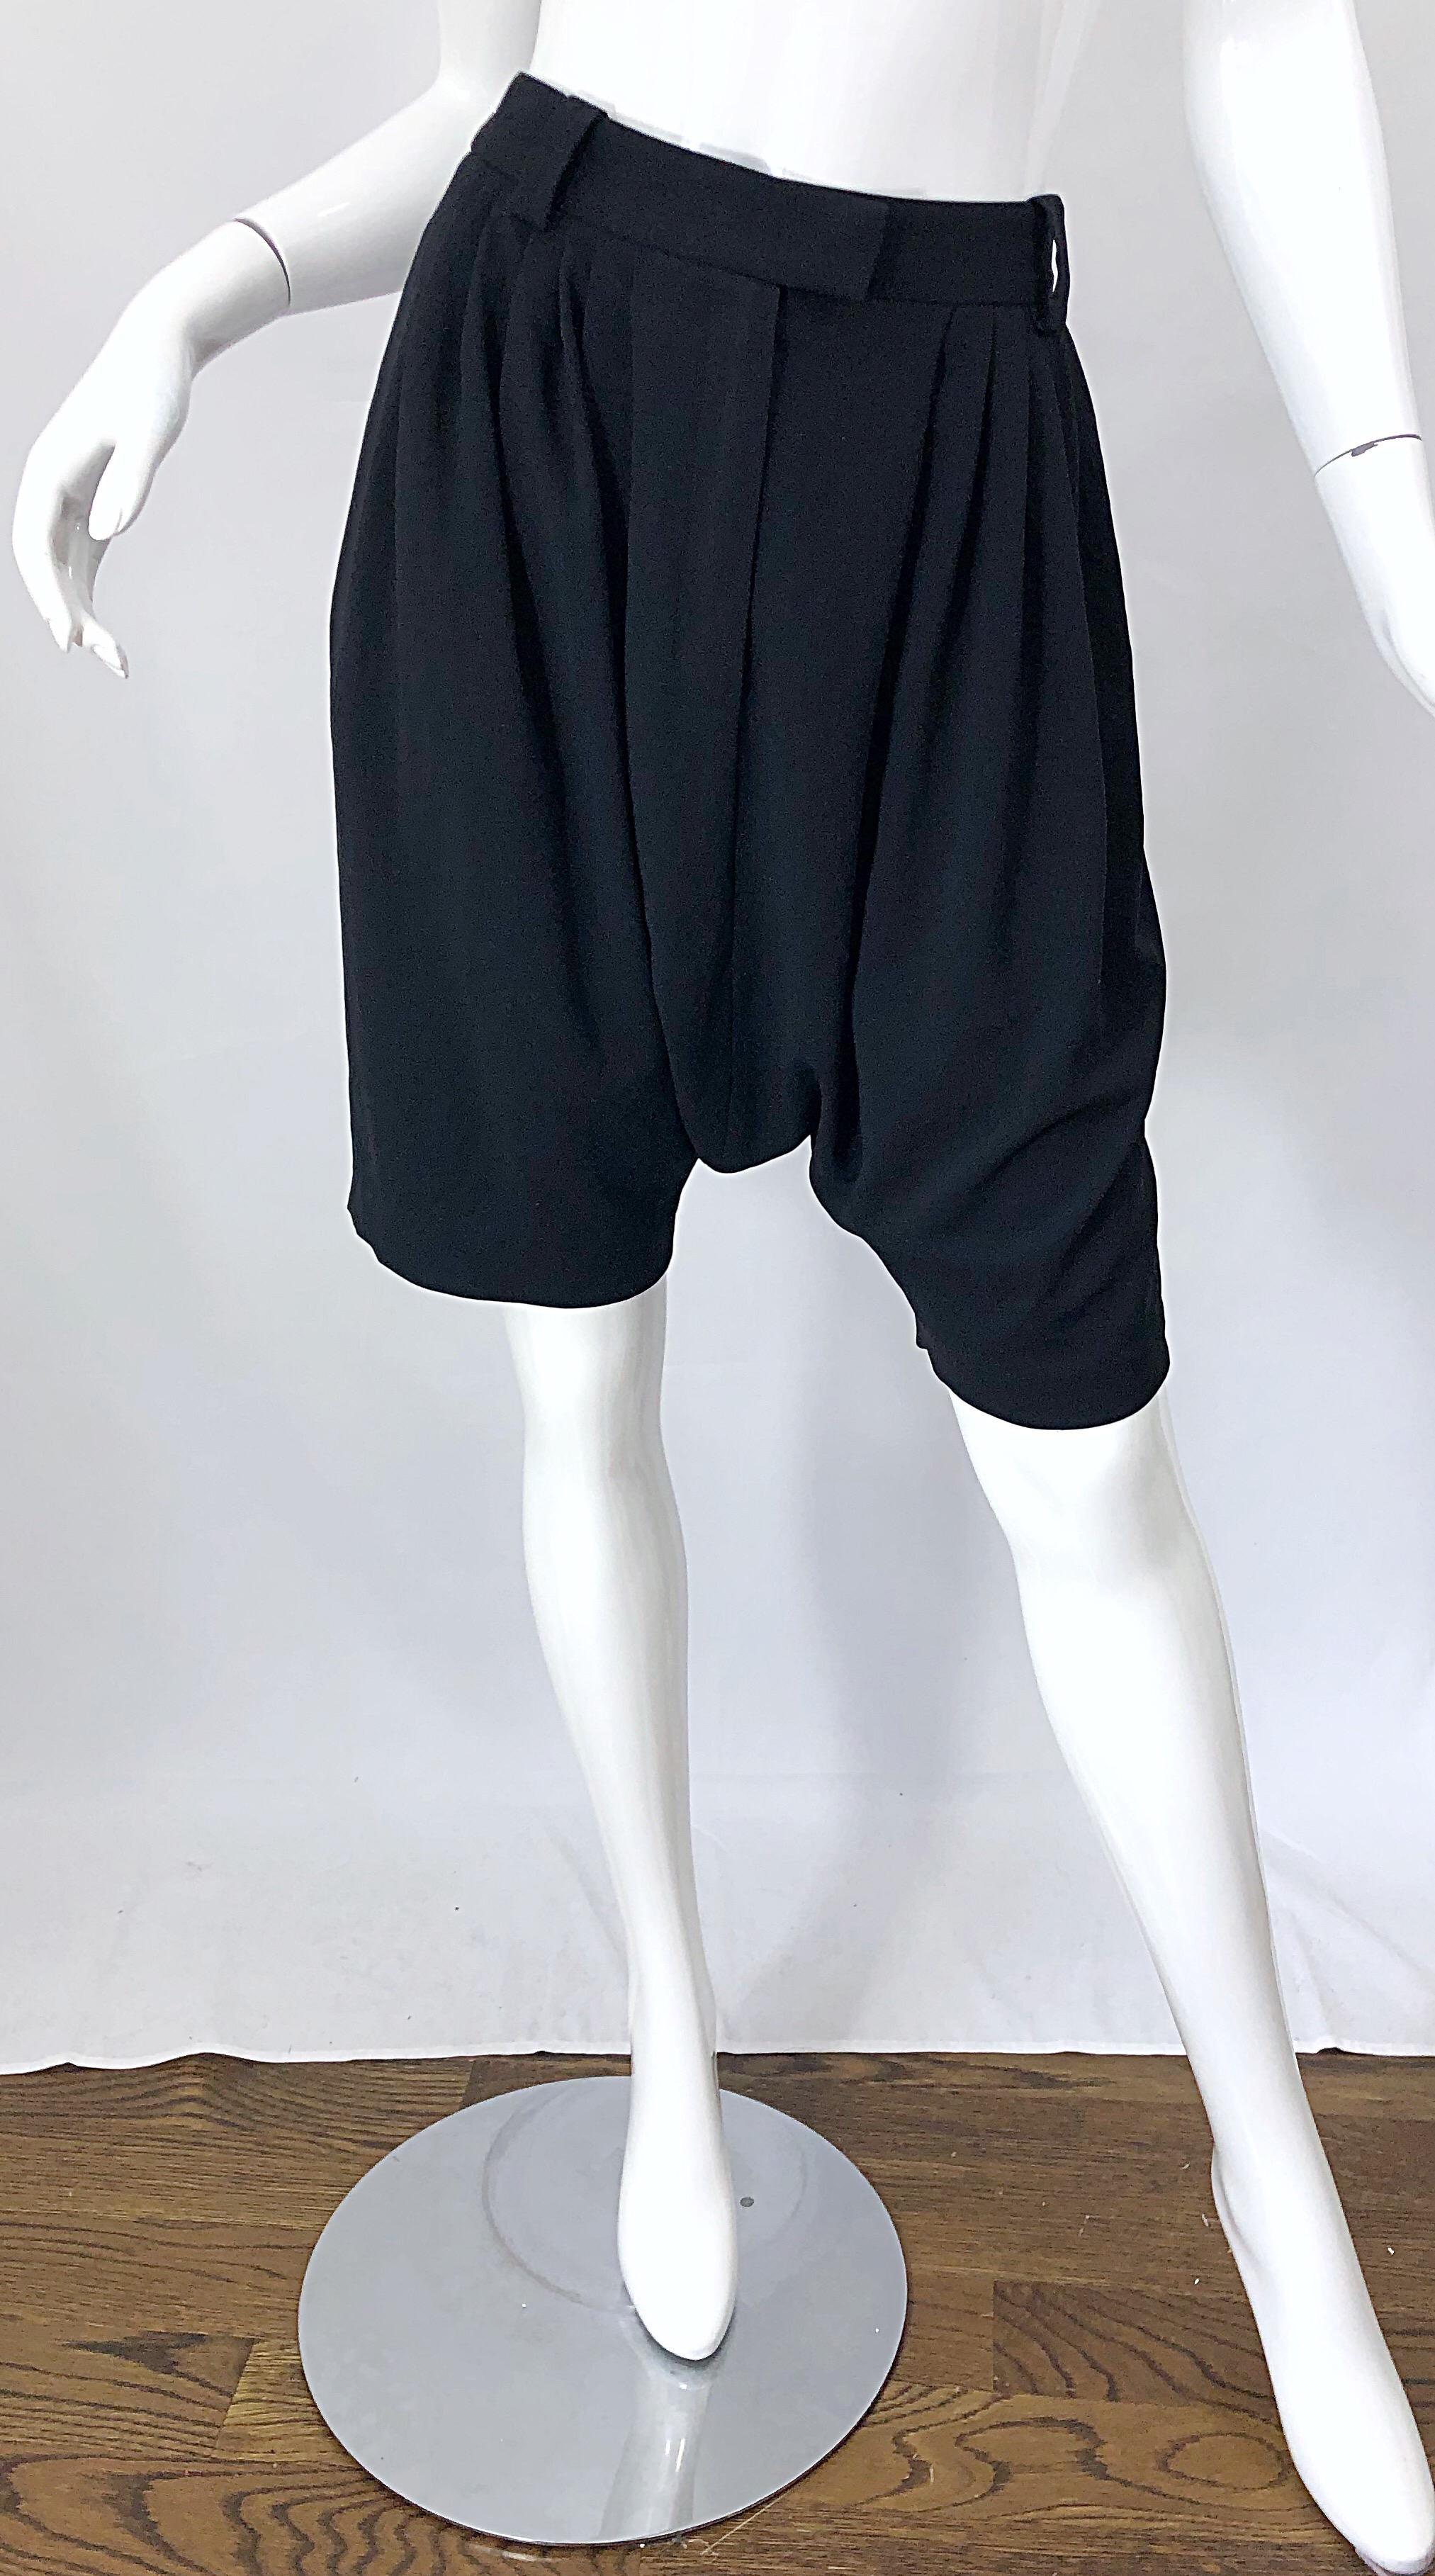 Chic brand new with tags GIVENCHY by Clare Waight Keller Size 40 black drop crotch / waist shorts! Features pleats, belt loops, and button closure at front center waist. POCKETS at each side of the hips. Can easily be dressed up or down. In great